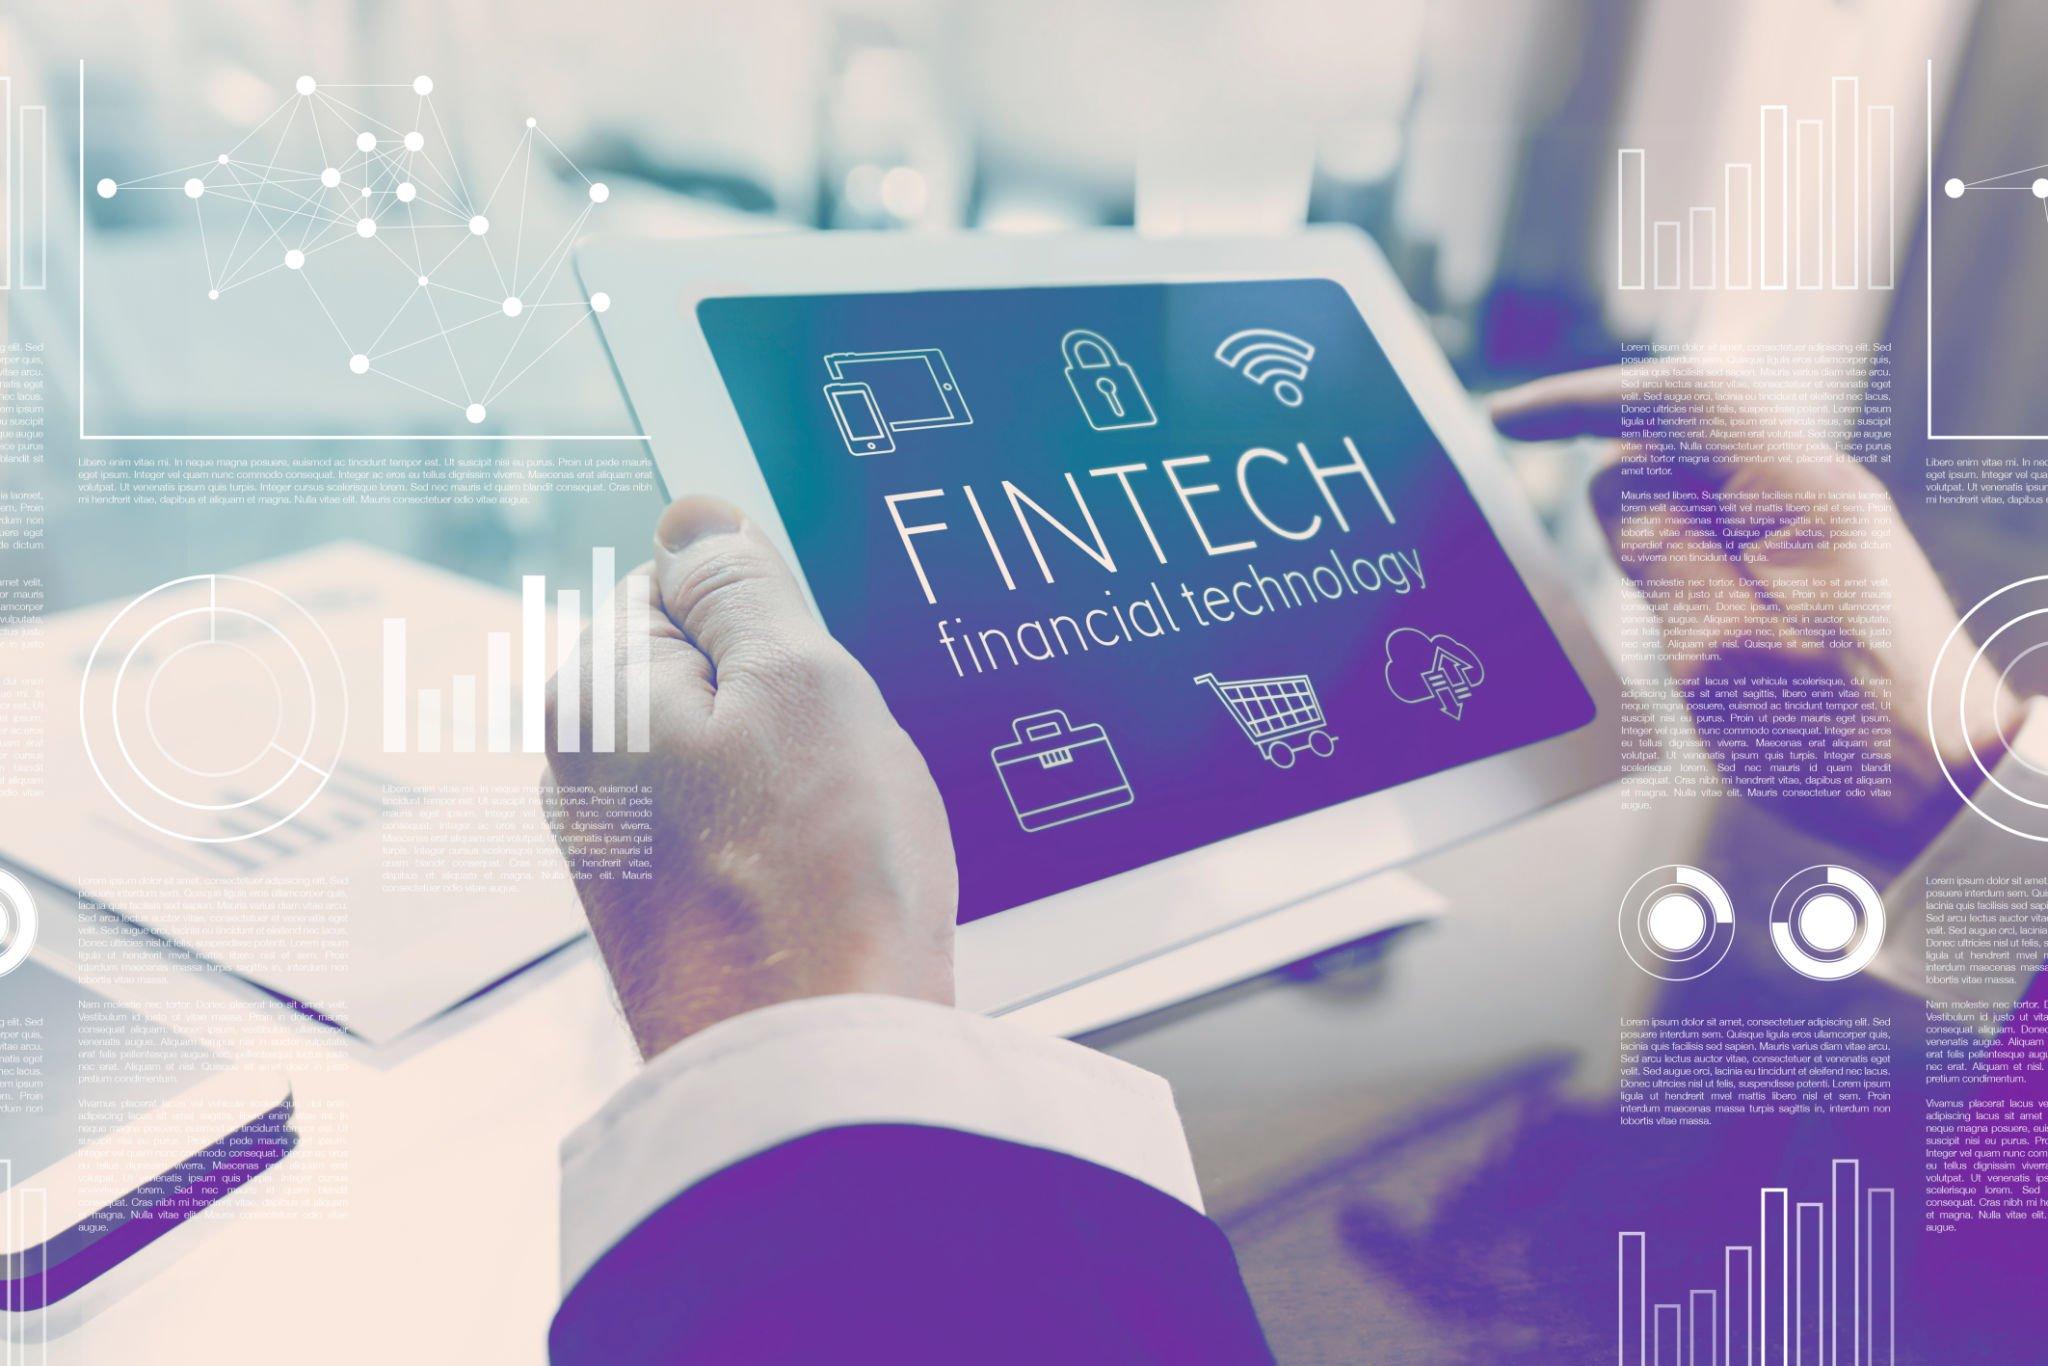 Do You Know the Uses and Impact of Financial Technology on Our Lives?